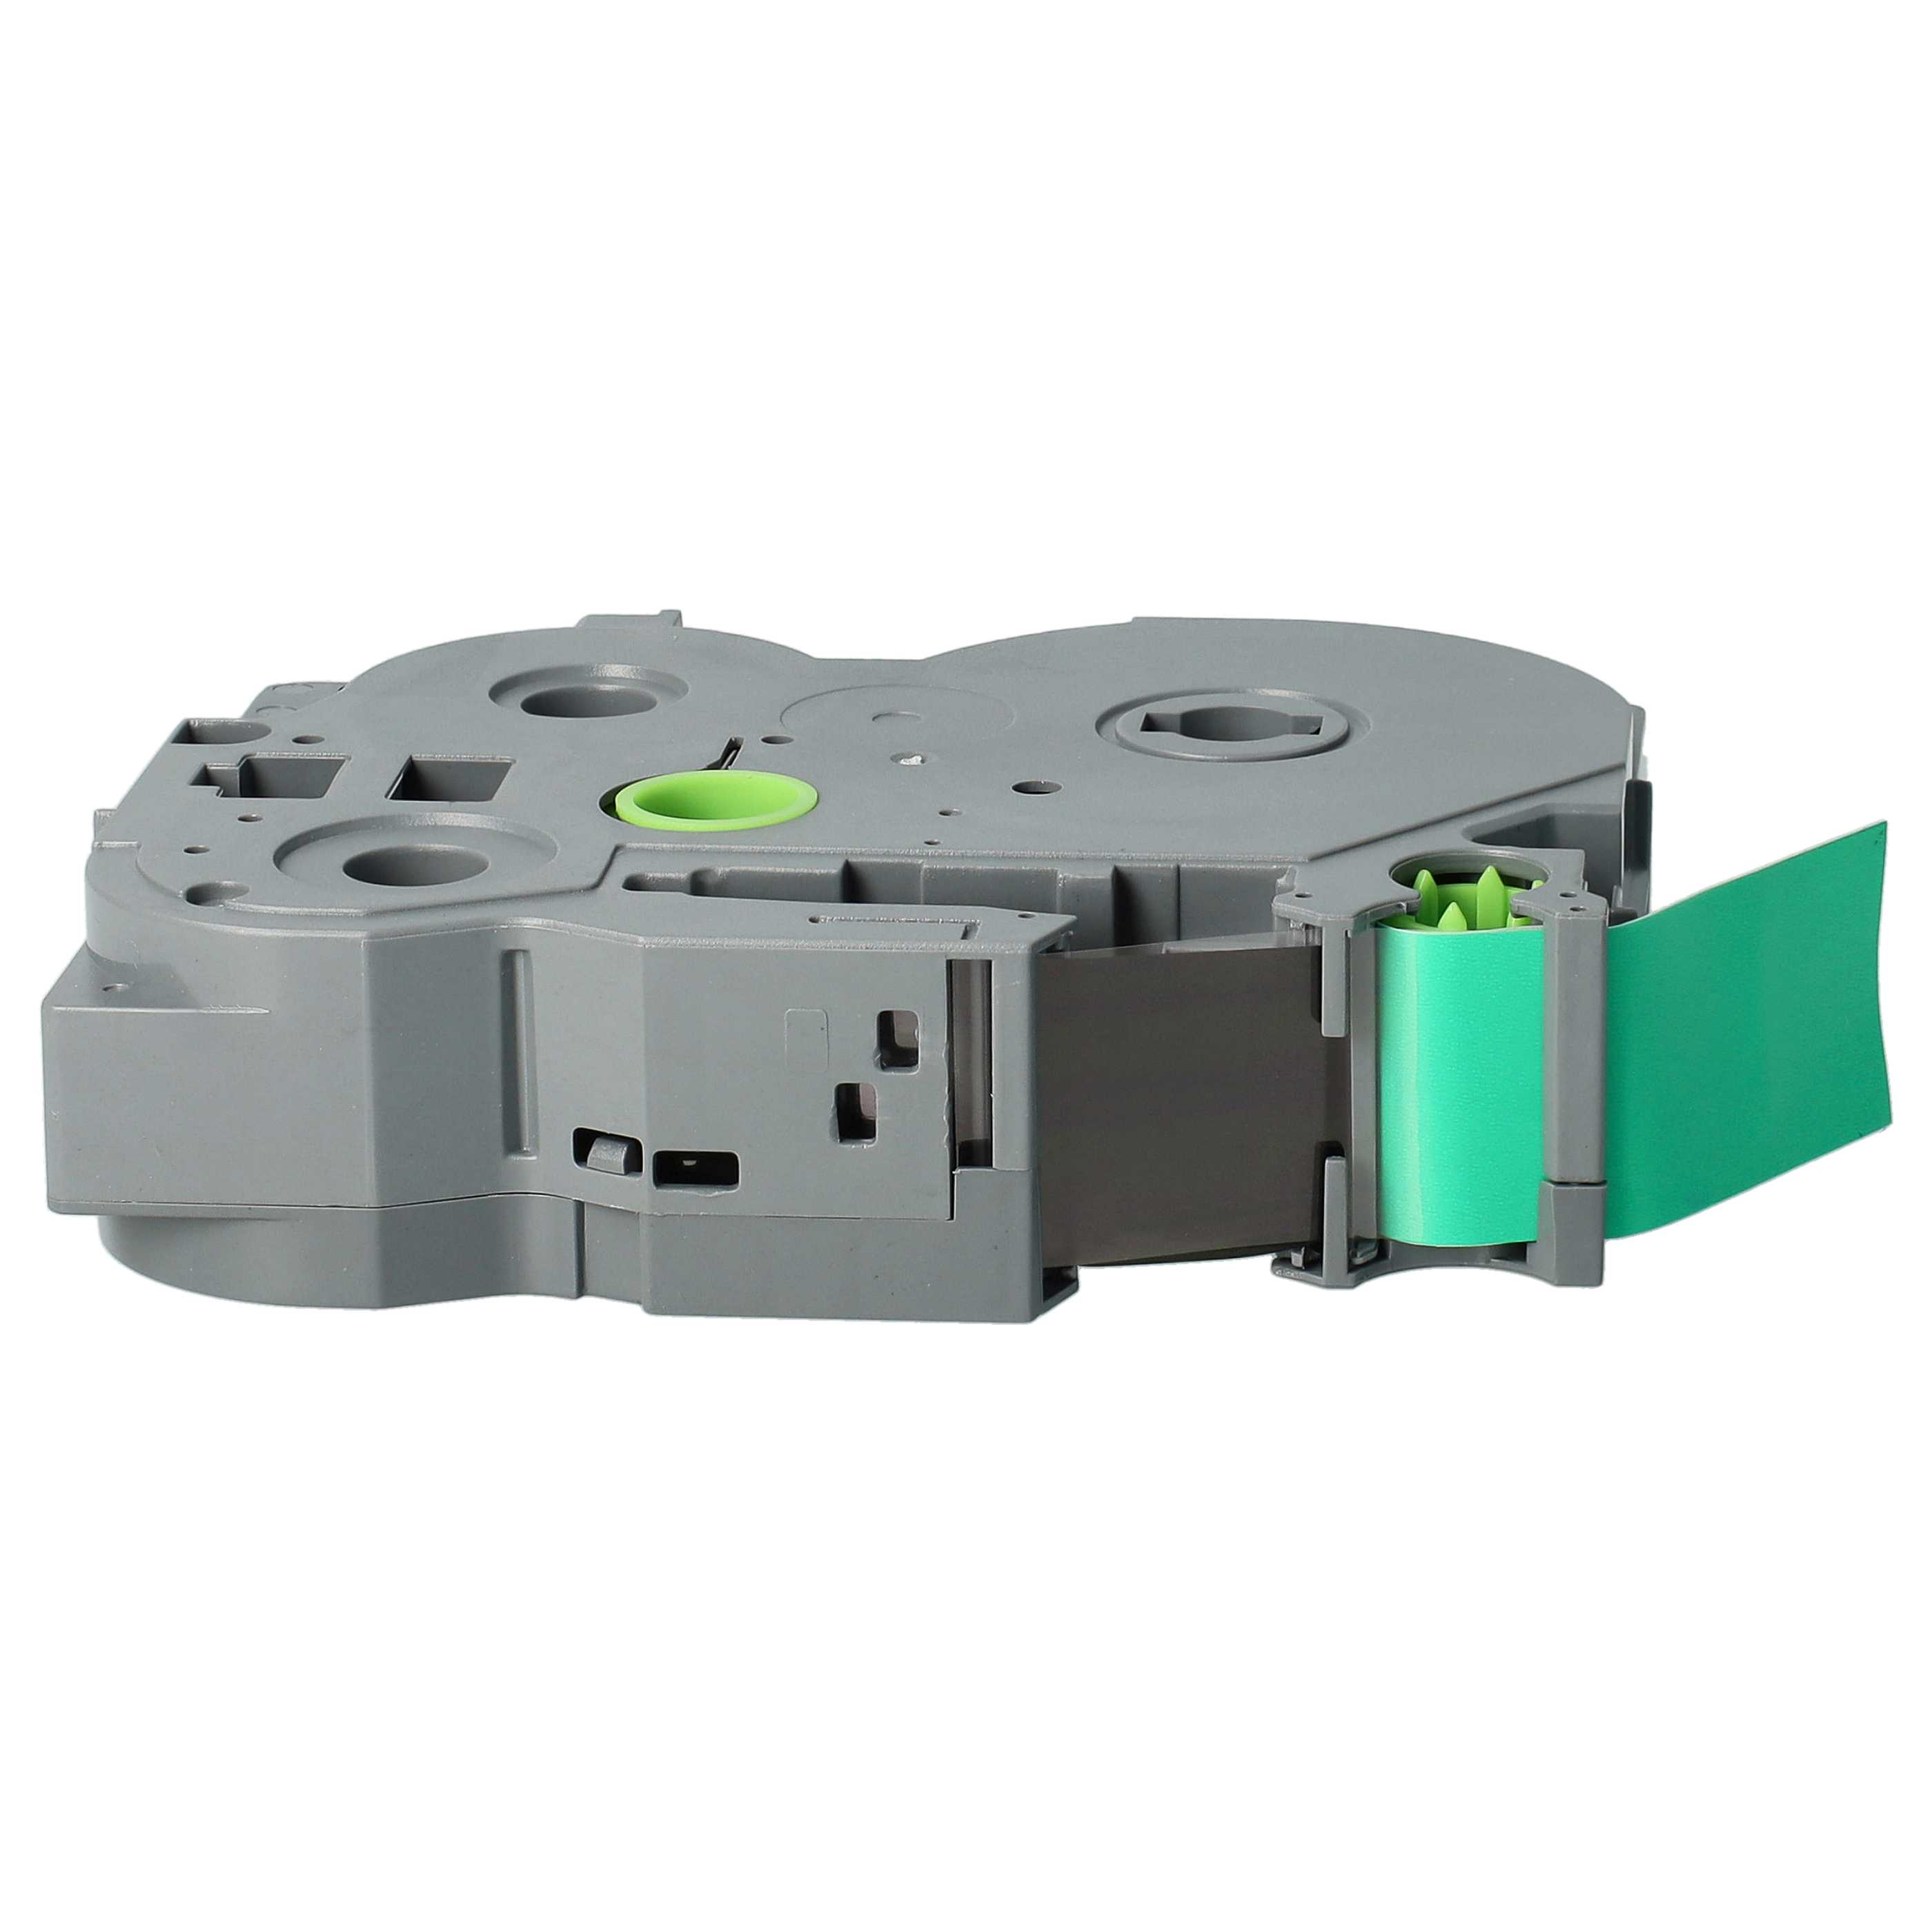 Label Tape as Replacement for Brother TZ-FX741, TZE-FX741, TZFX741, TZeFX741 - 18 mm Black to Green, Flexible